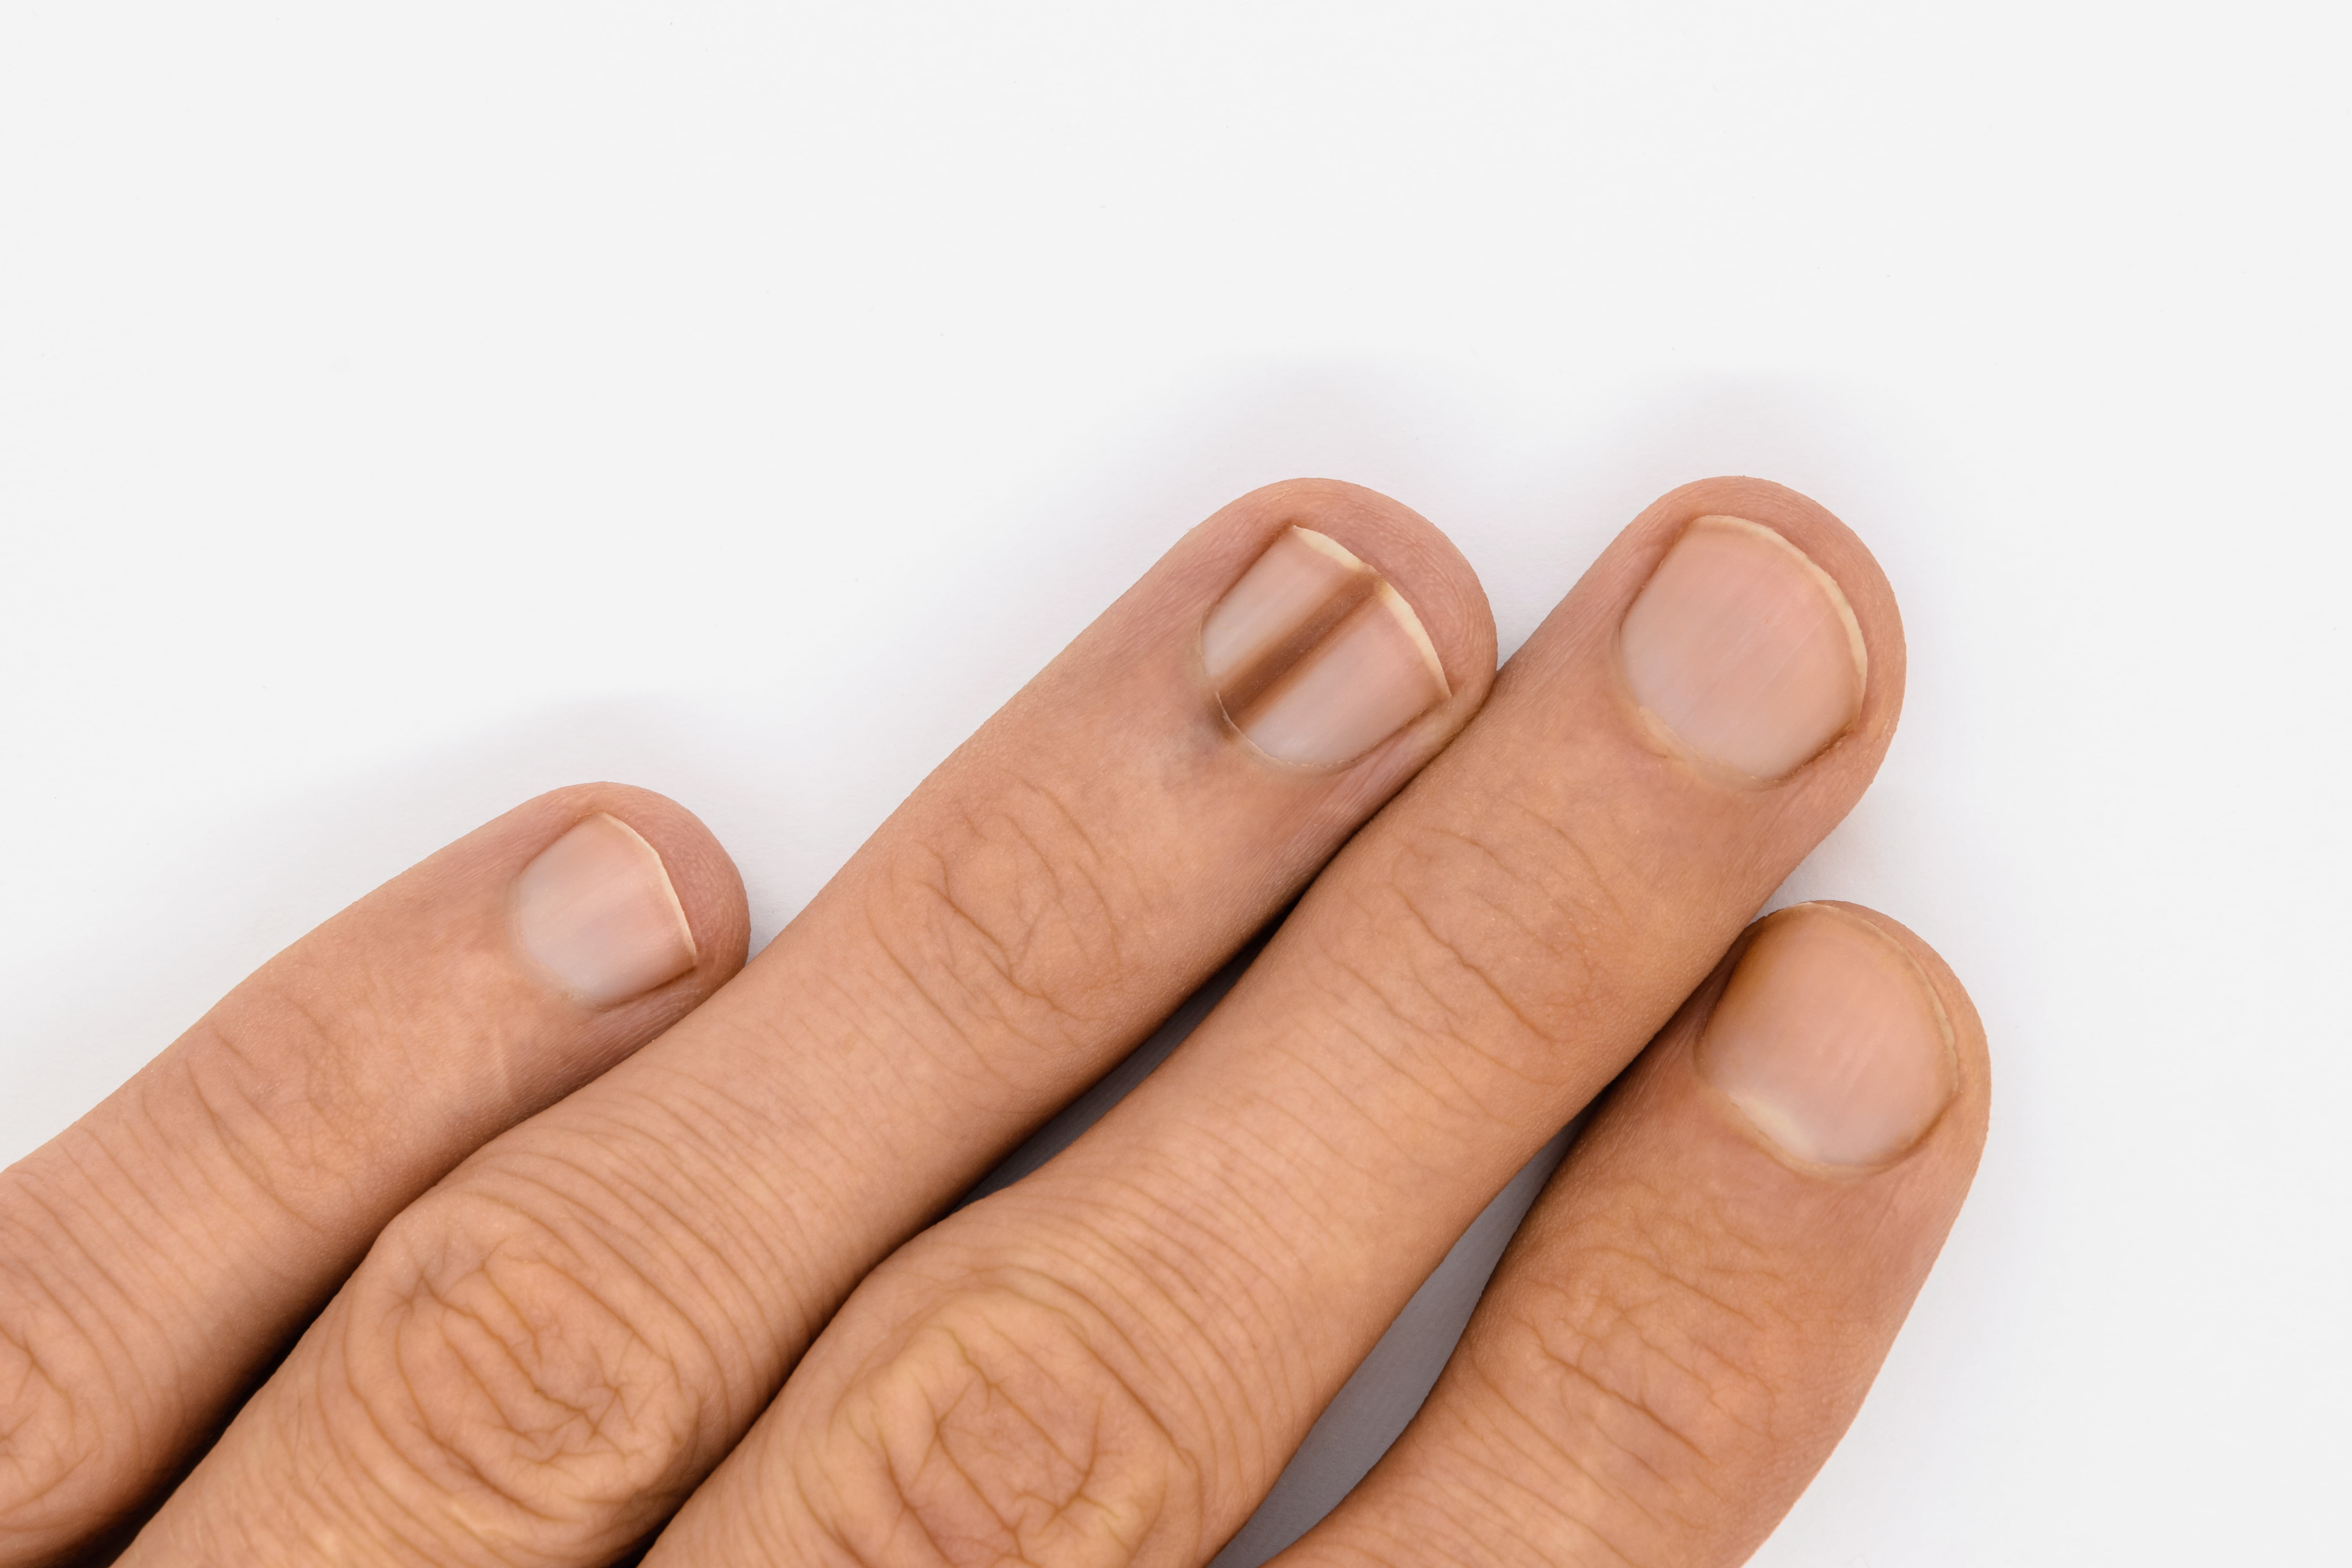 Black Lines on Nails: Causes and Treatments | POPSUGAR Beauty